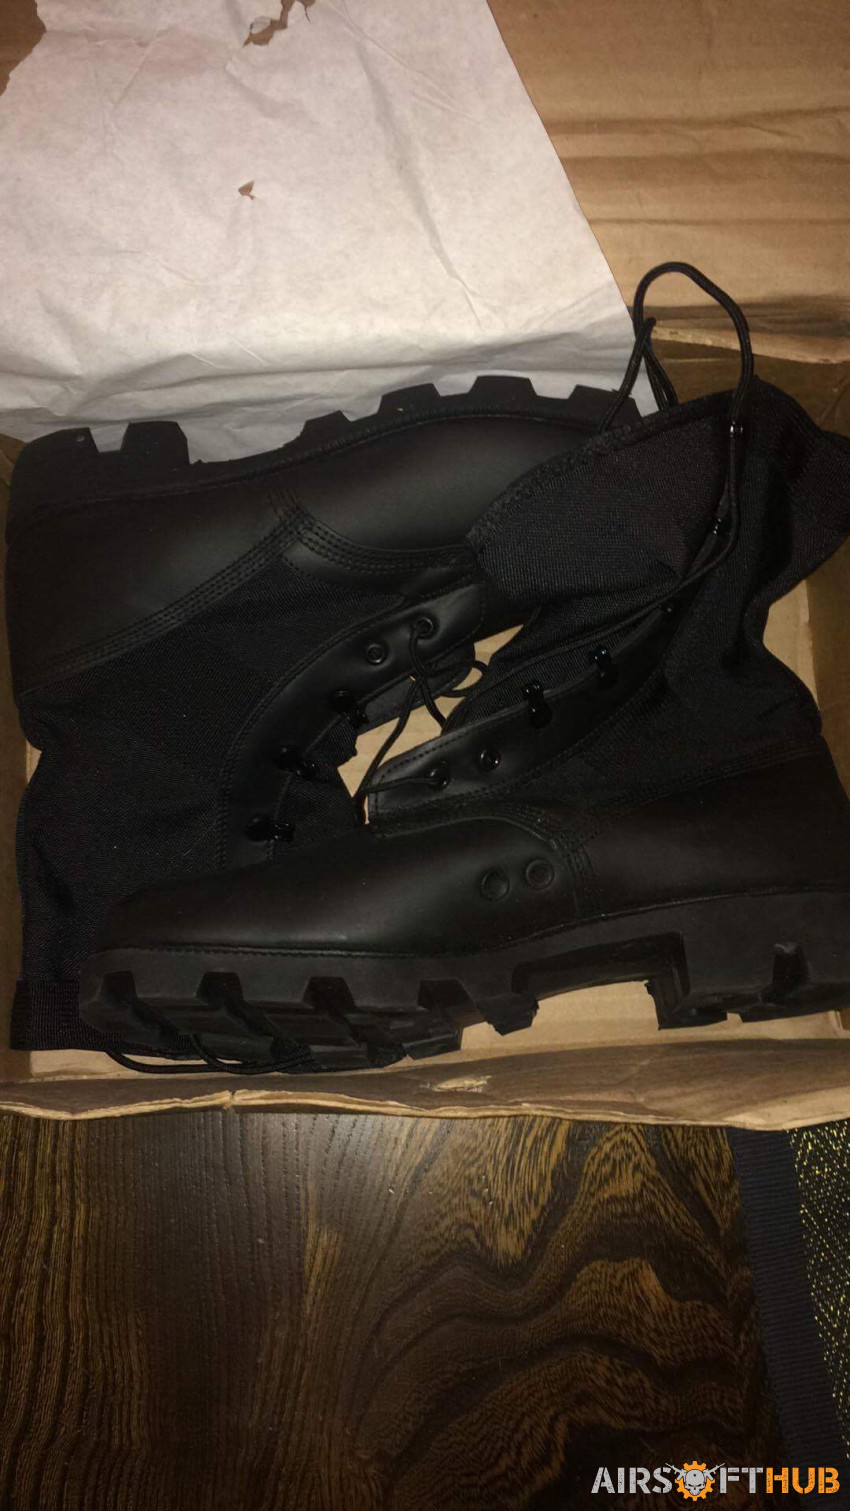 Jungle boots - Used airsoft equipment